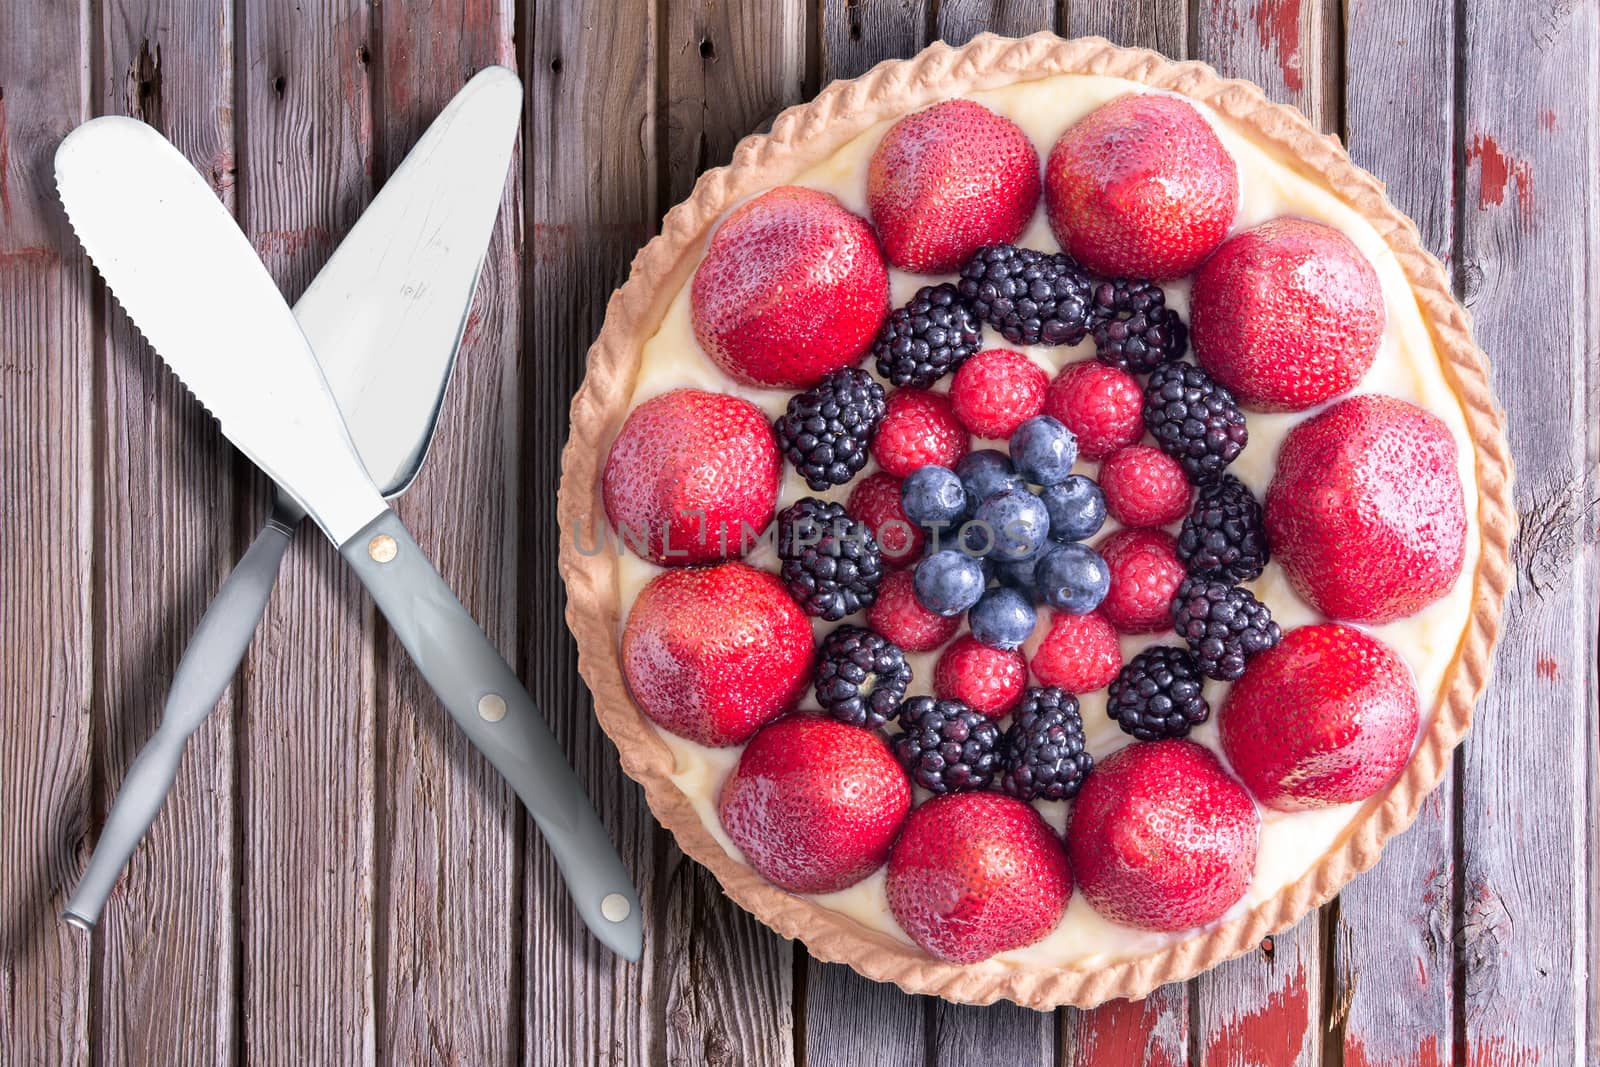 Fresh berries homemade tart with serving utensils, placed on a rustic wooden table. Above view.